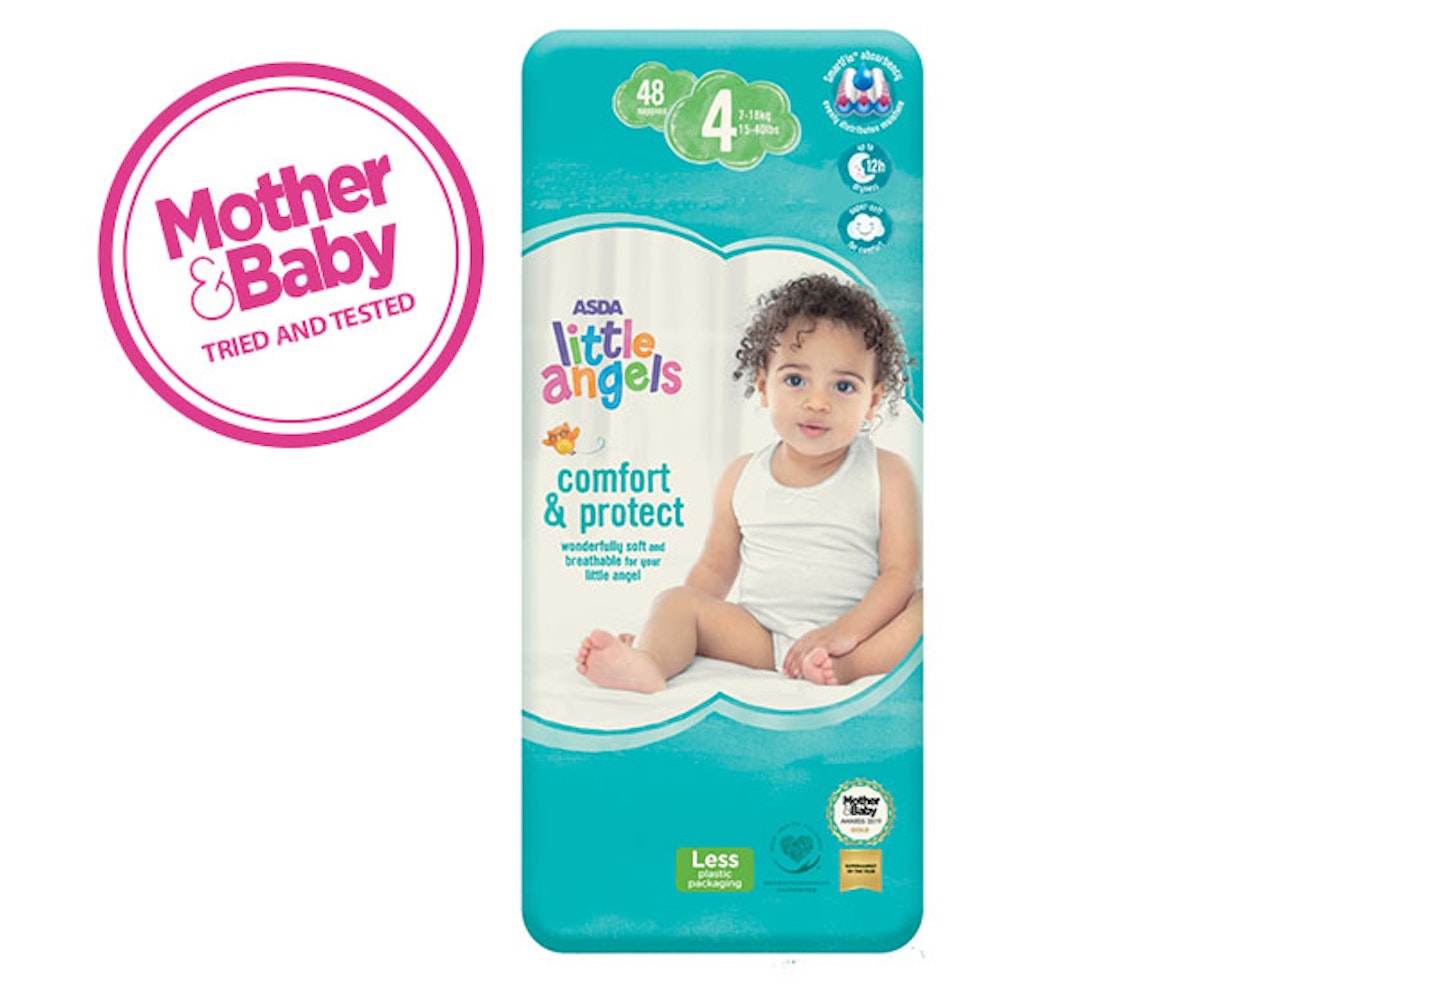 Asda Little Angels Comfort & Protect nappies